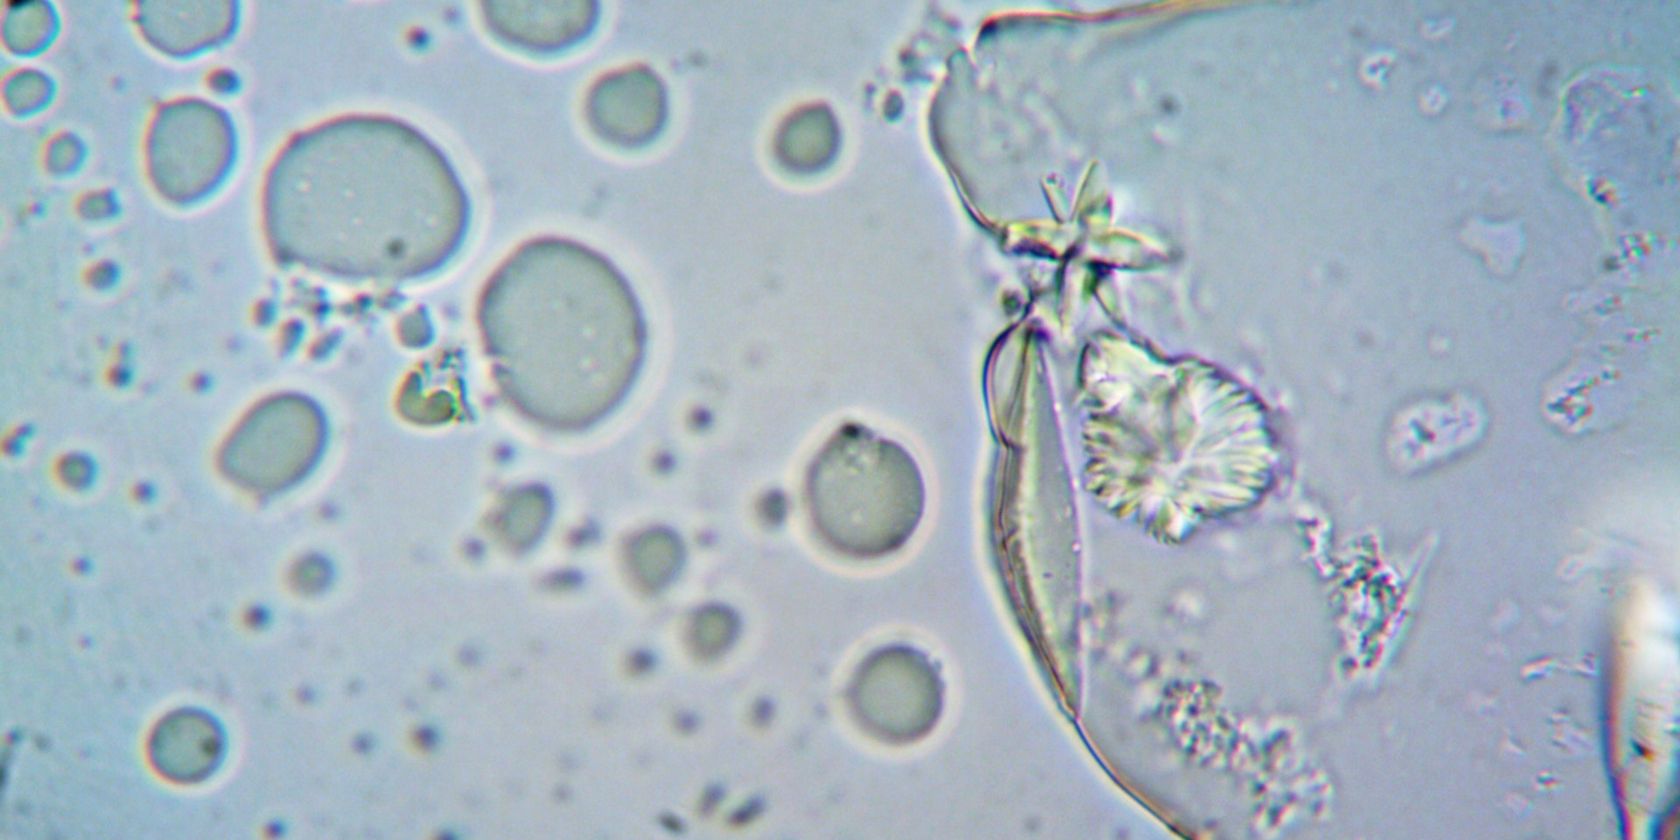 cells under a microscope slide